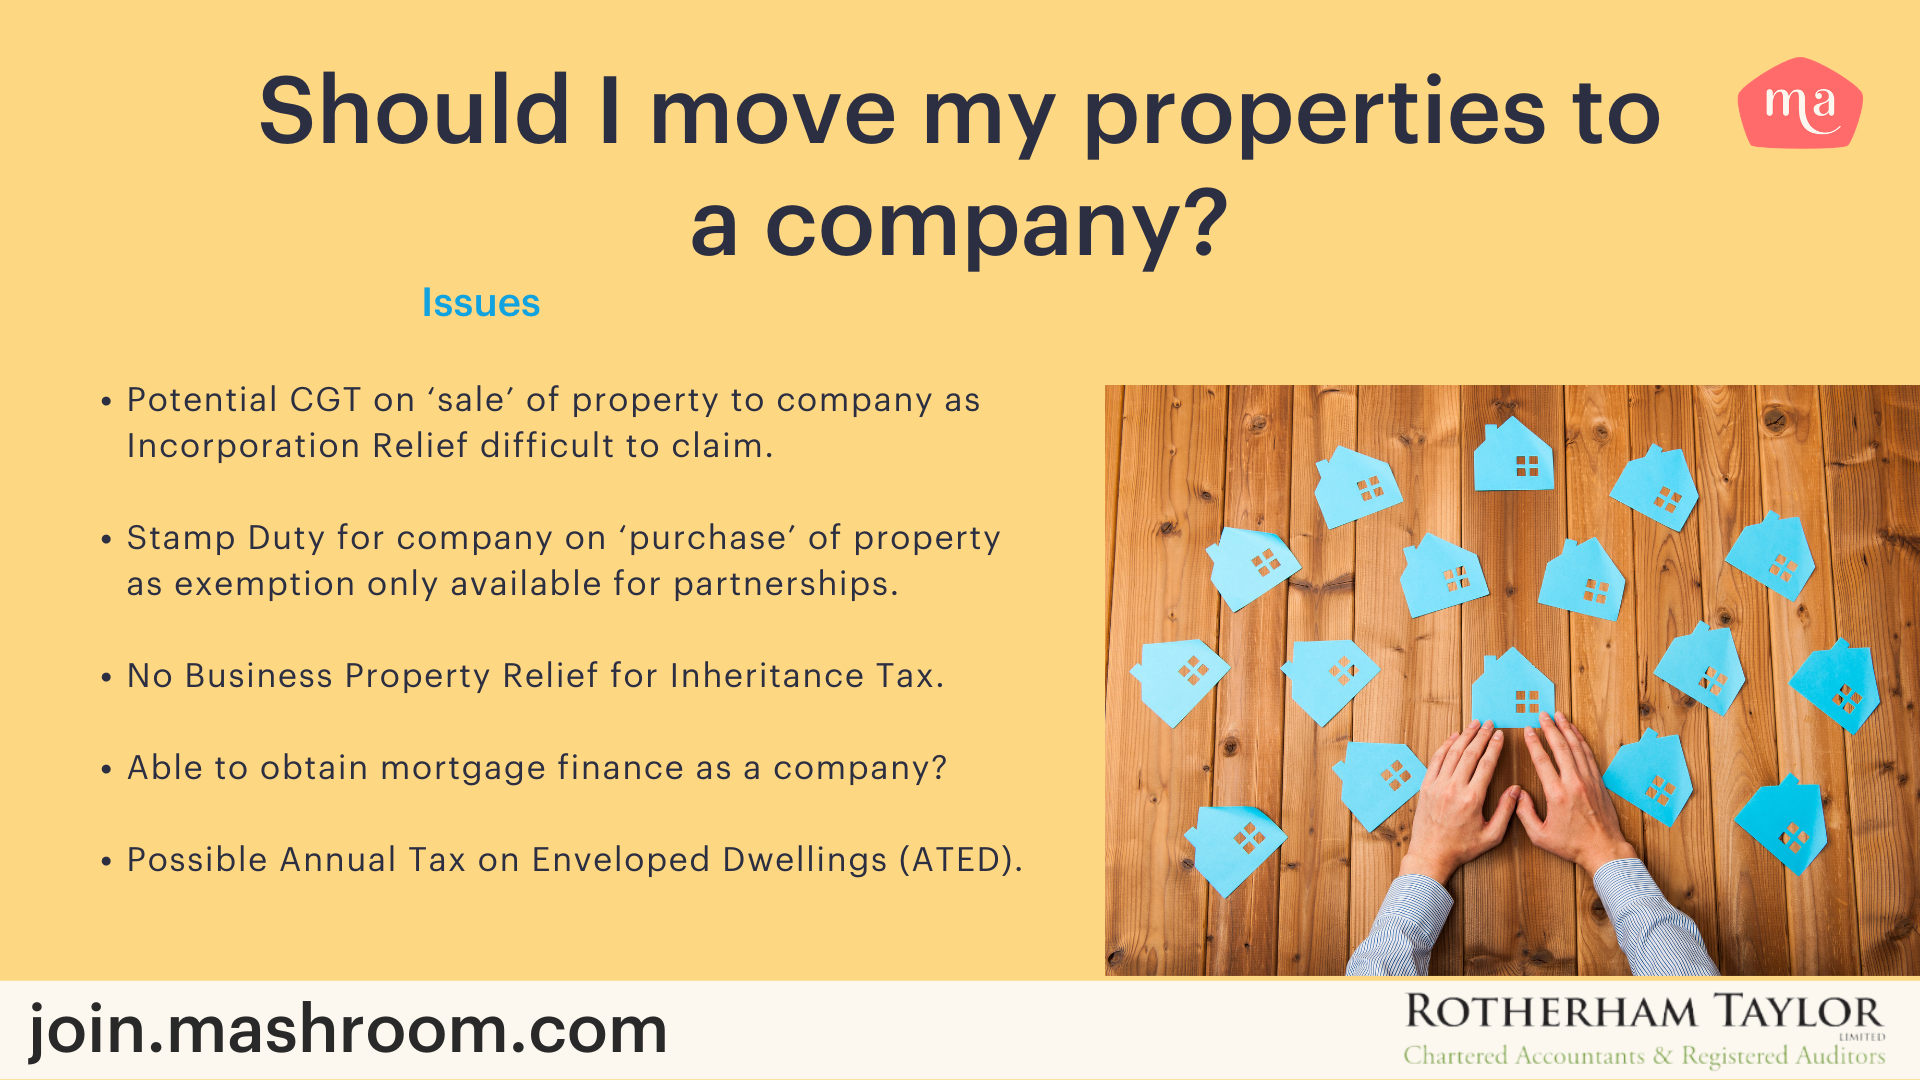 image listing the negatives of moving a property into a company